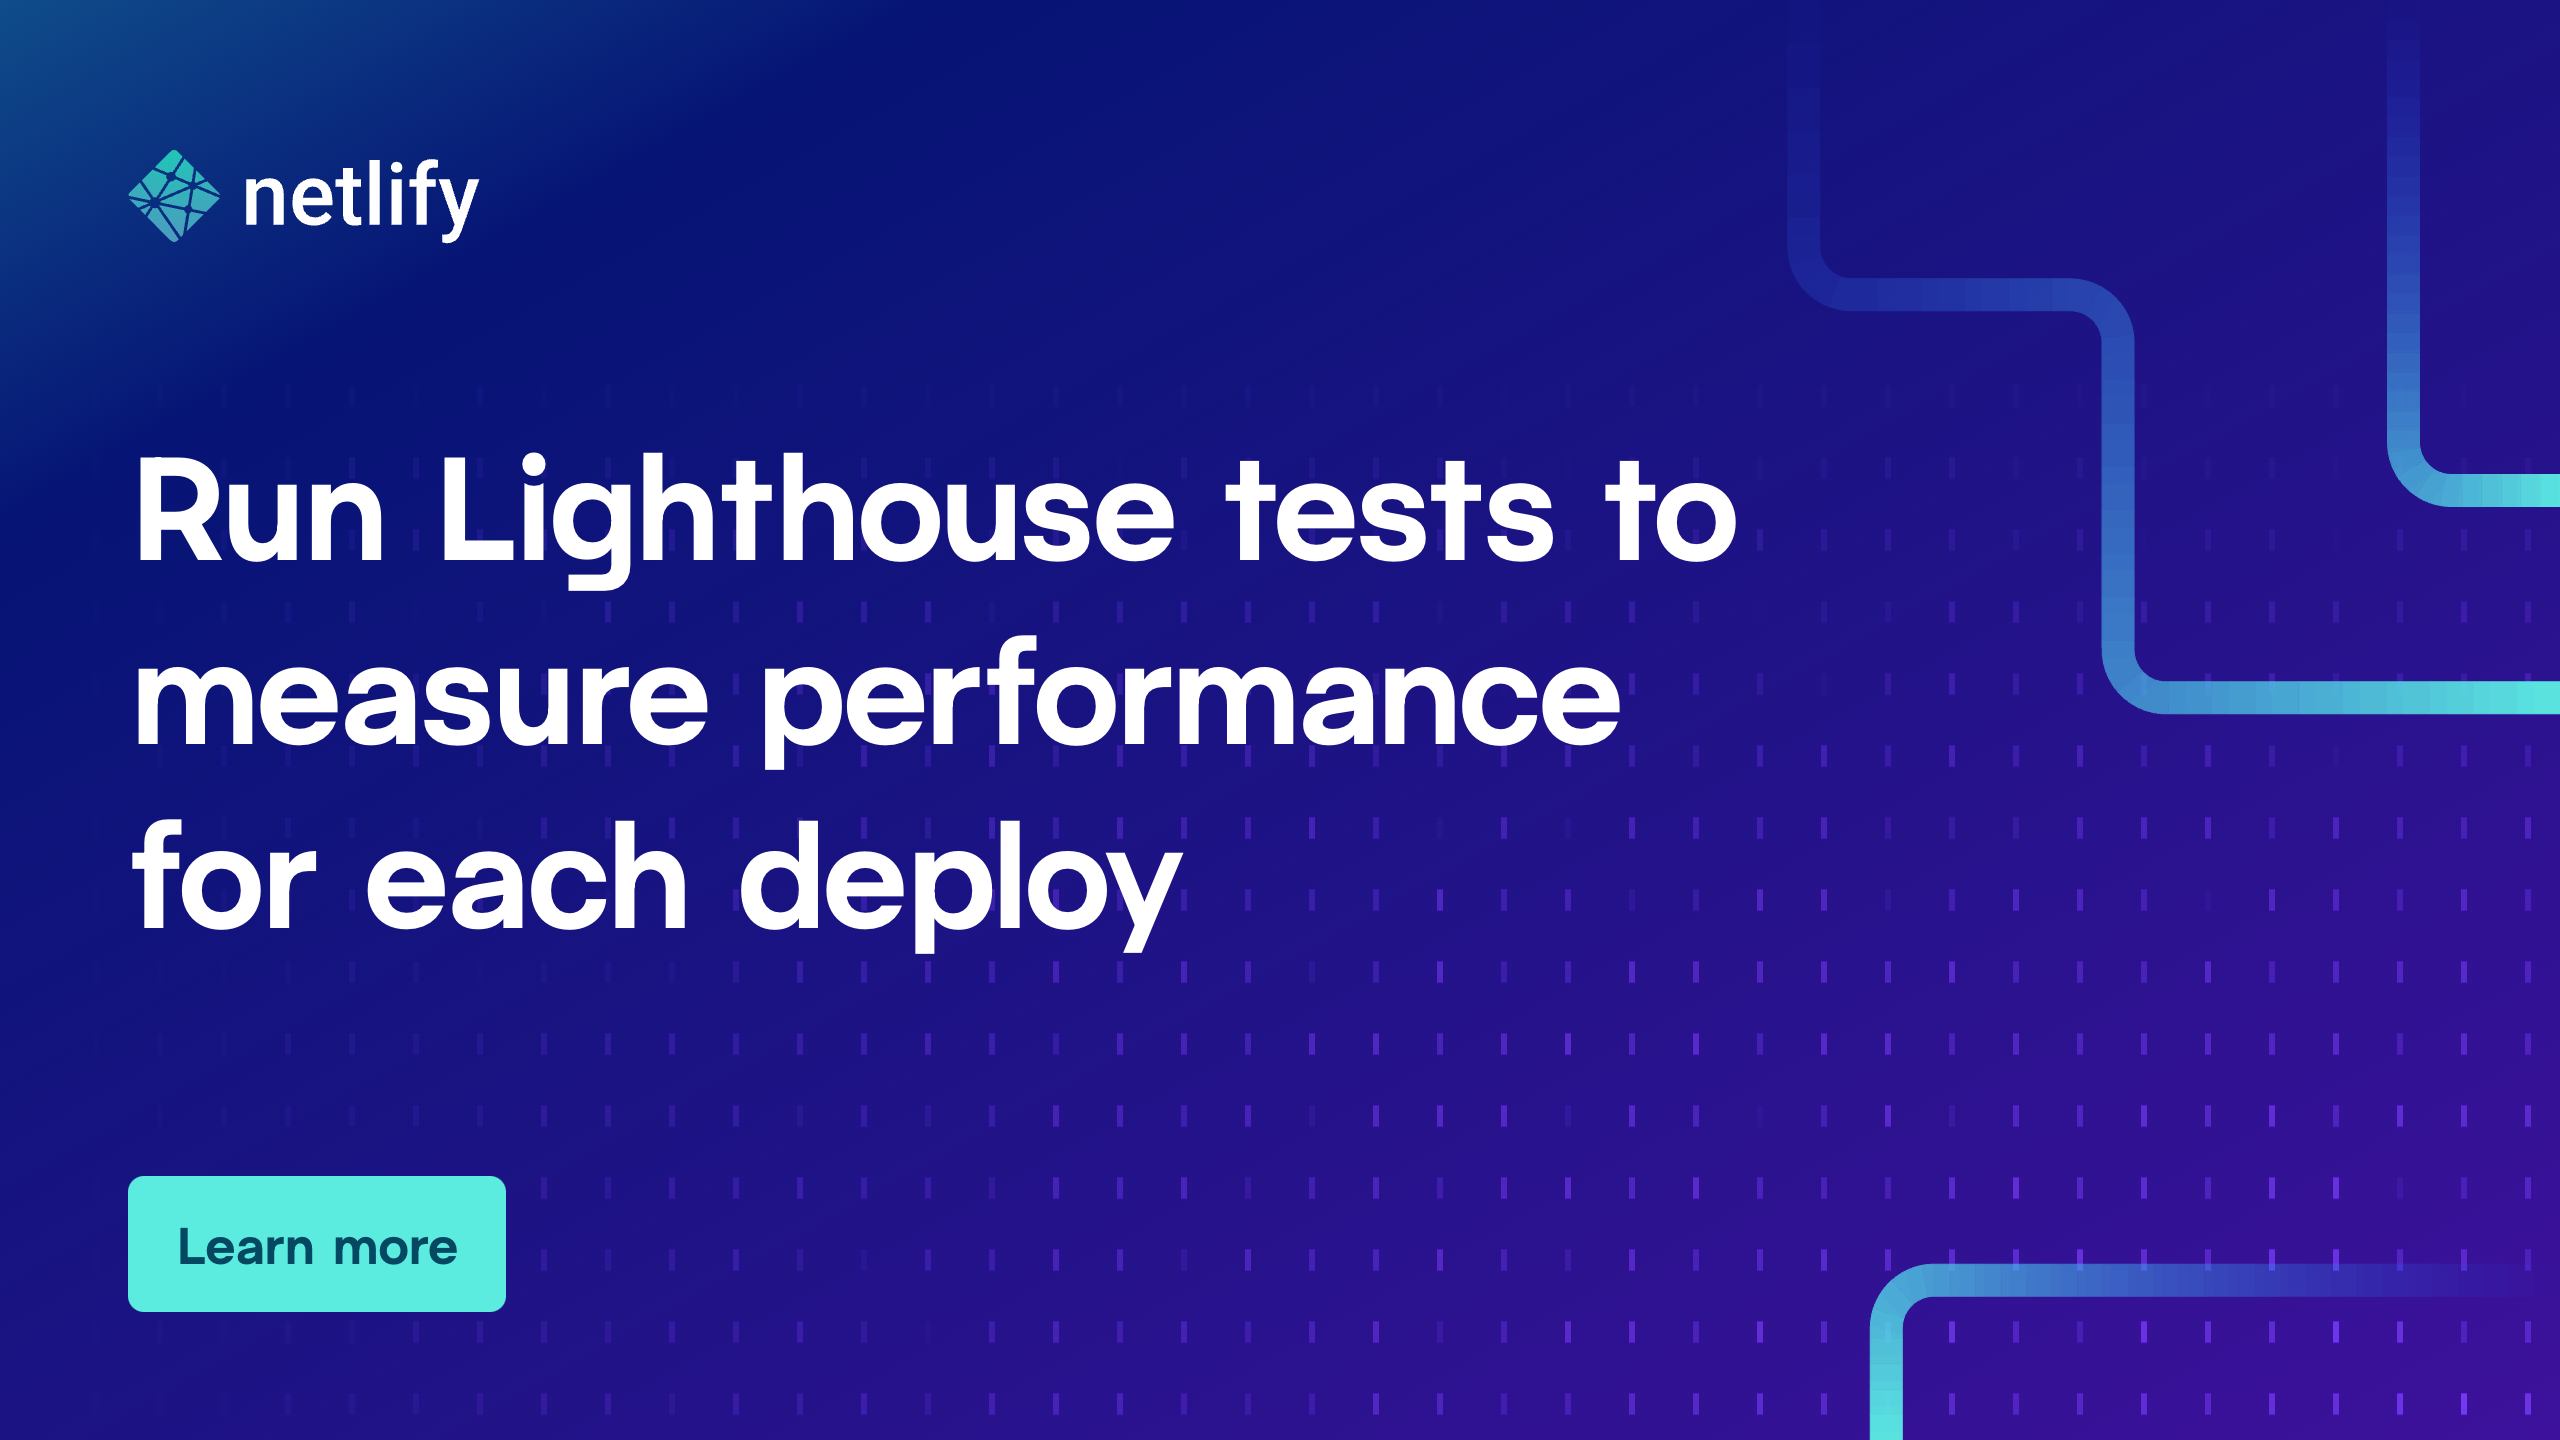 Full Lighthouse reports for each deploy | Netlify blog